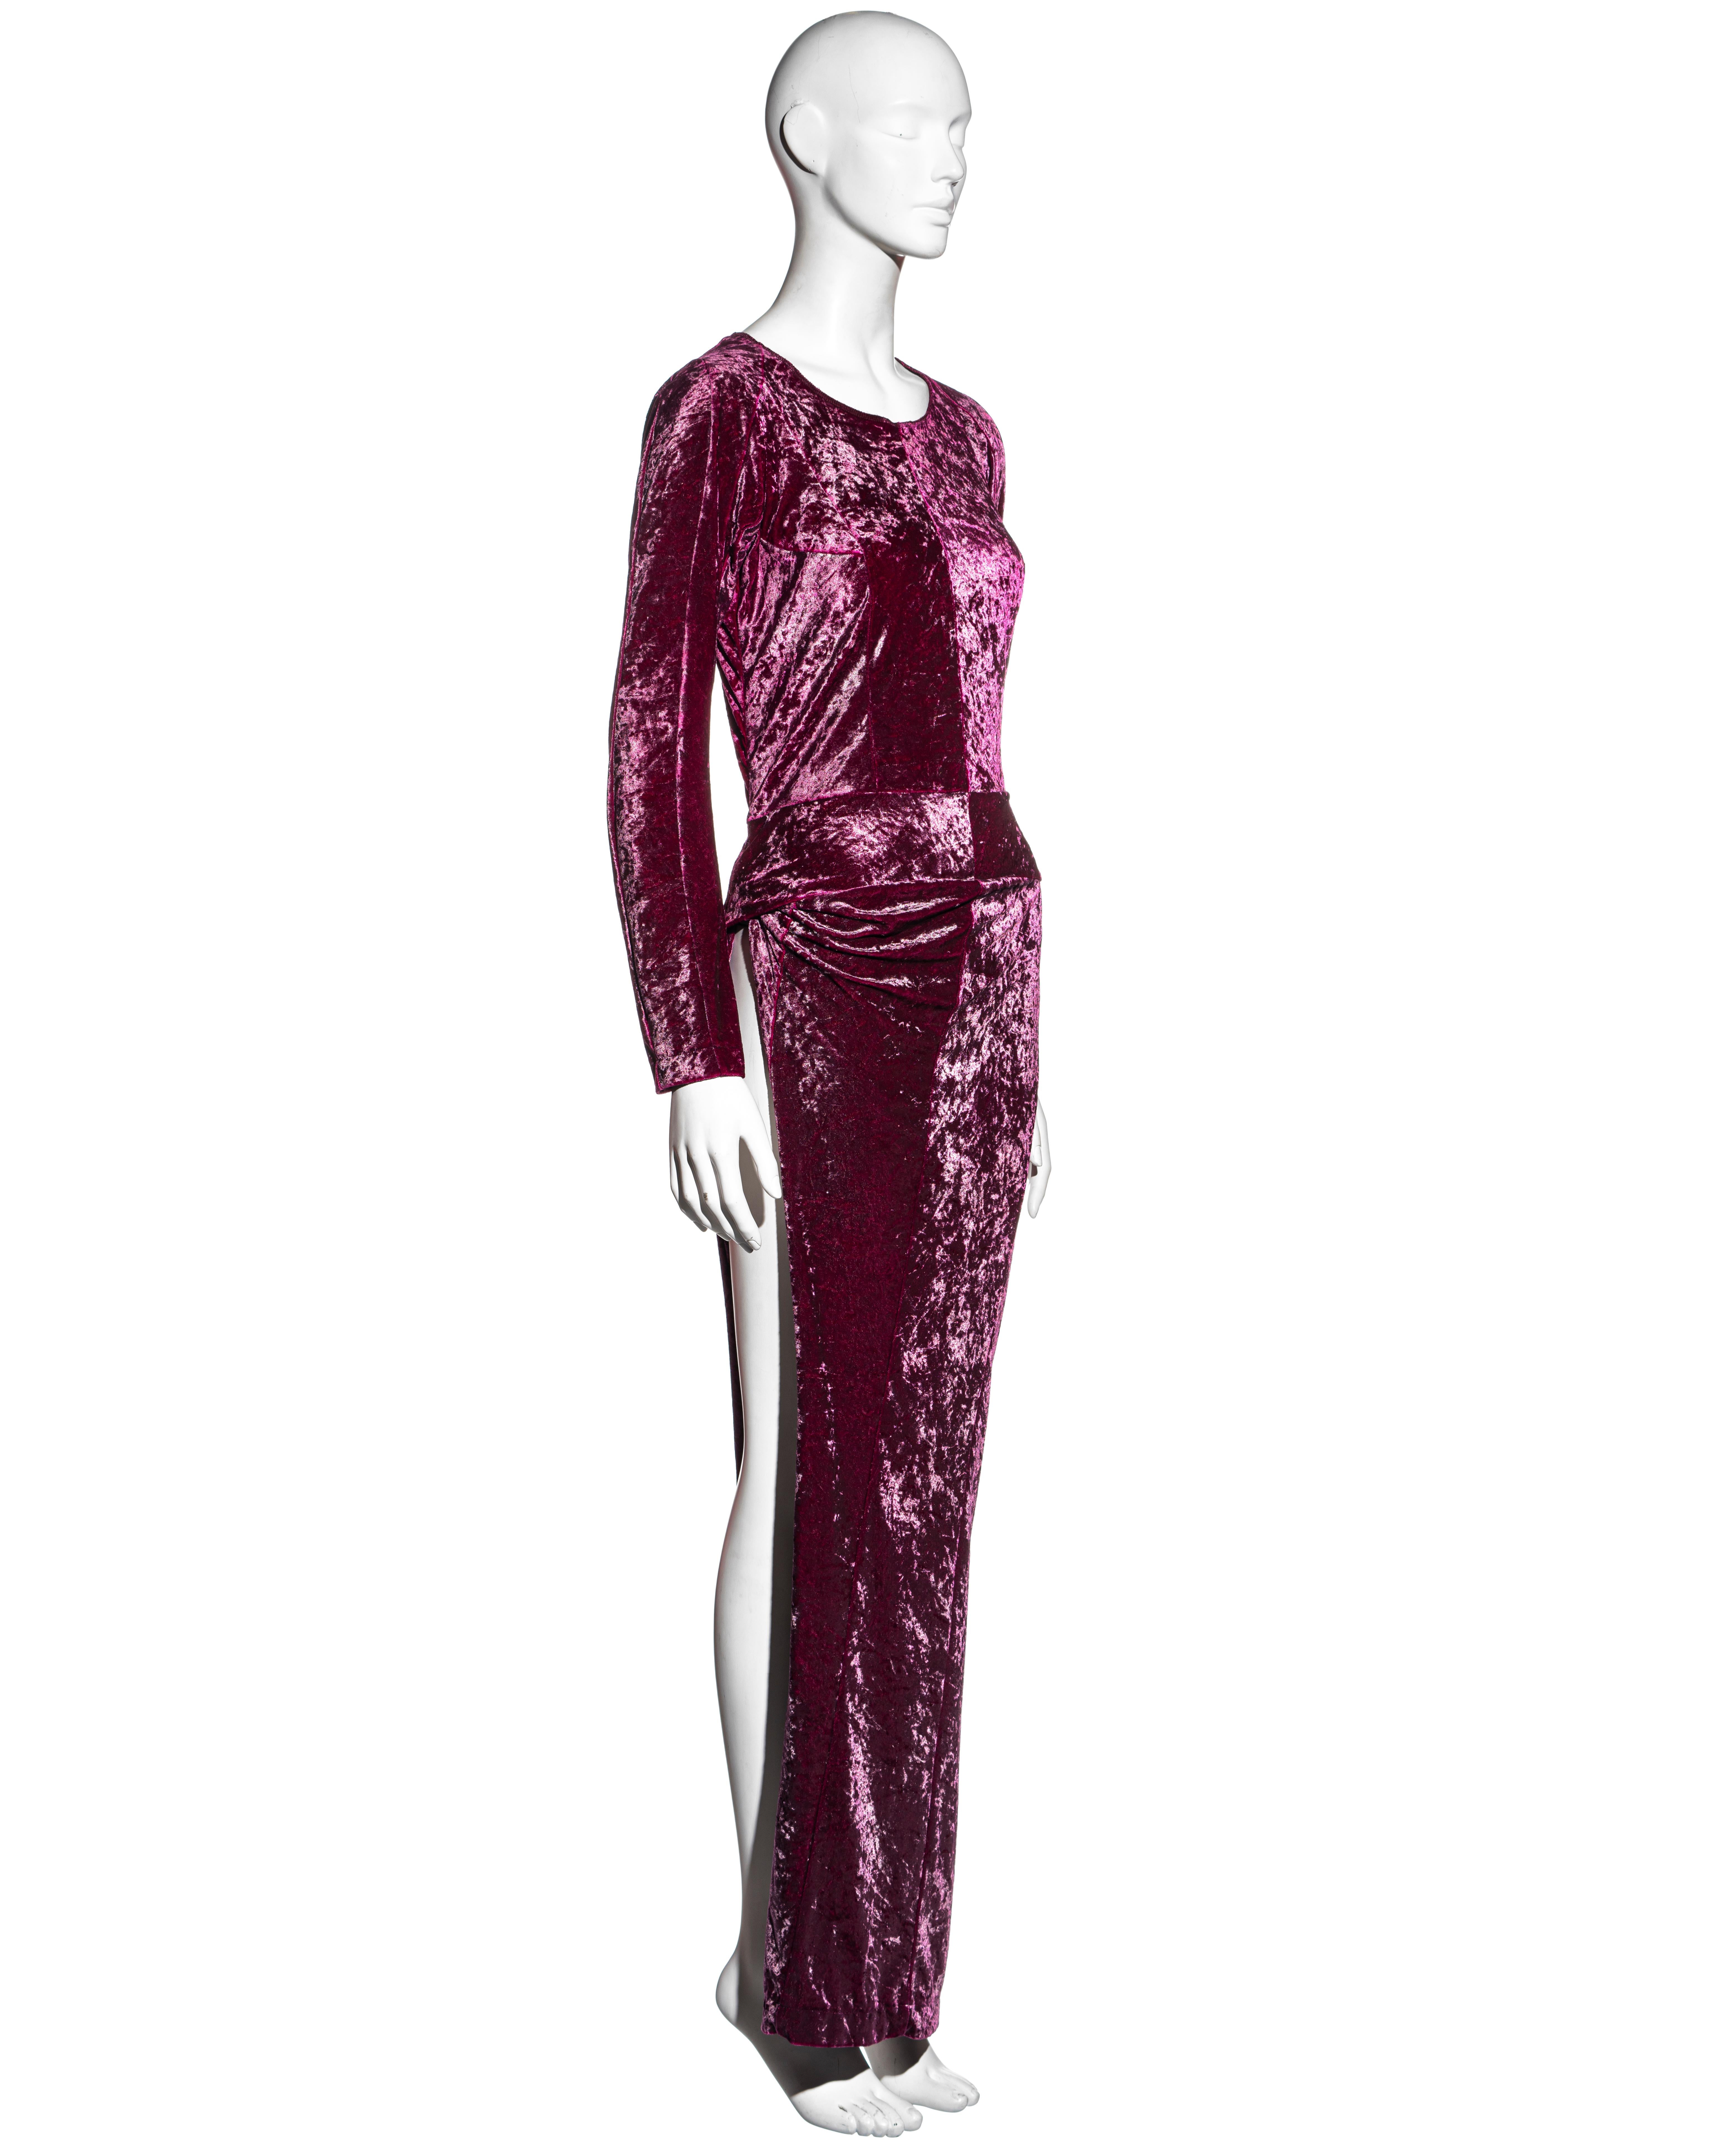 ▪ Junya Watanabe magenta crushed velvet maxi dress
▪ Scoop neck 
▪ Concealed zipper at side seam 
▪ One leg hole at the side of the skirt causing a high leg slit when worn
▪ Can also be worn with pants as styled on the runway or worn with the leg